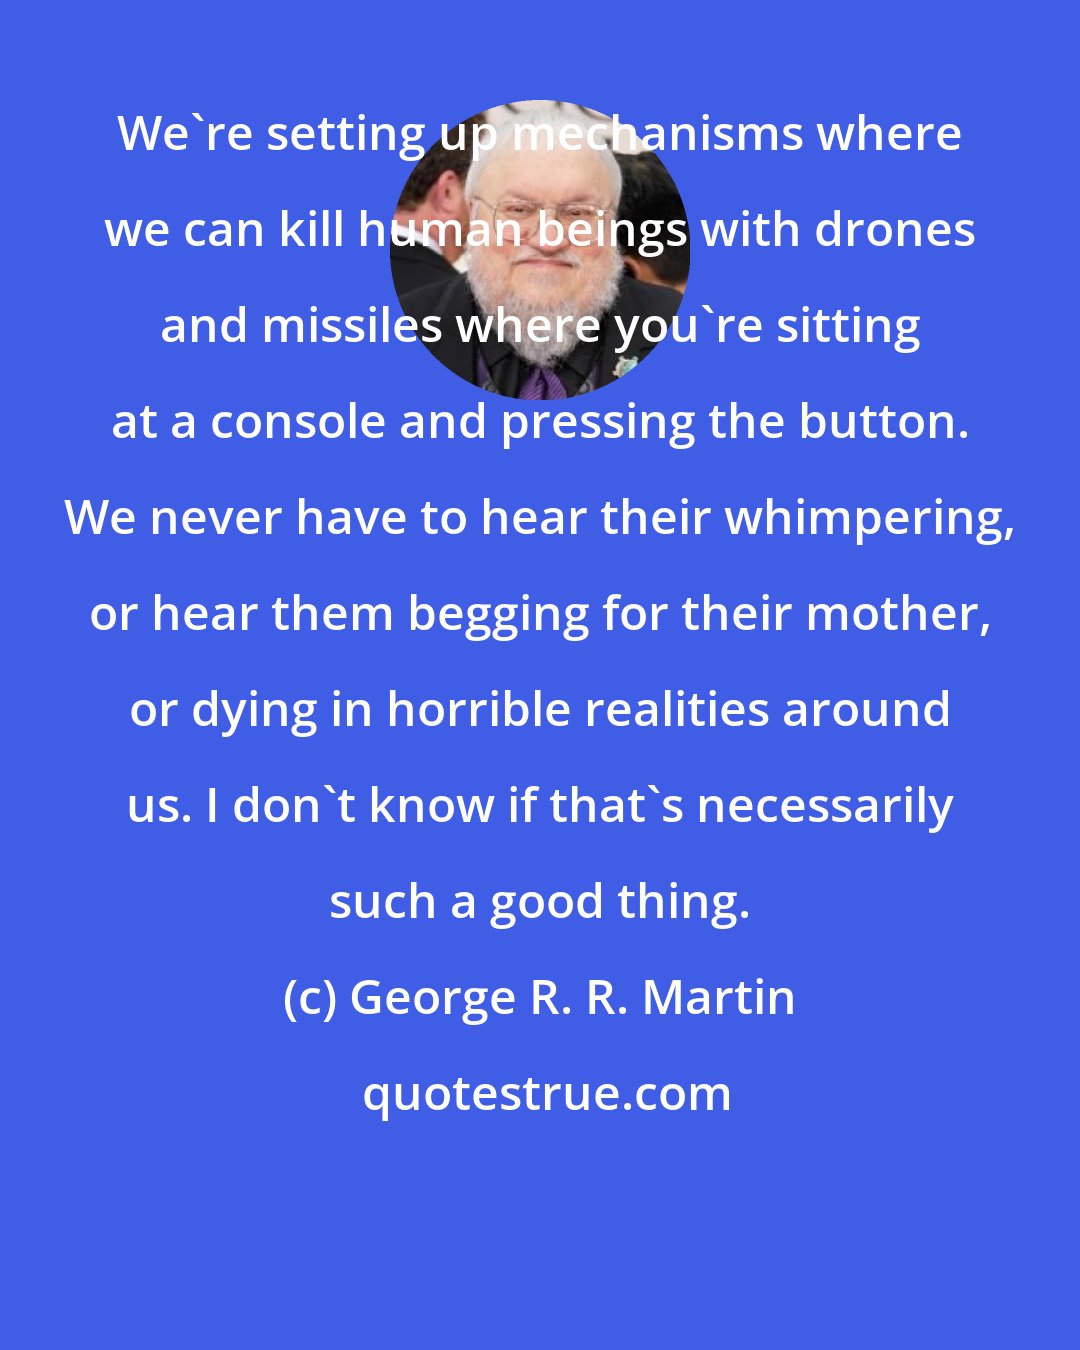 George R. R. Martin: We're setting up mechanisms where we can kill human beings with drones and missiles where you're sitting at a console and pressing the button. We never have to hear their whimpering, or hear them begging for their mother, or dying in horrible realities around us. I don't know if that's necessarily such a good thing.